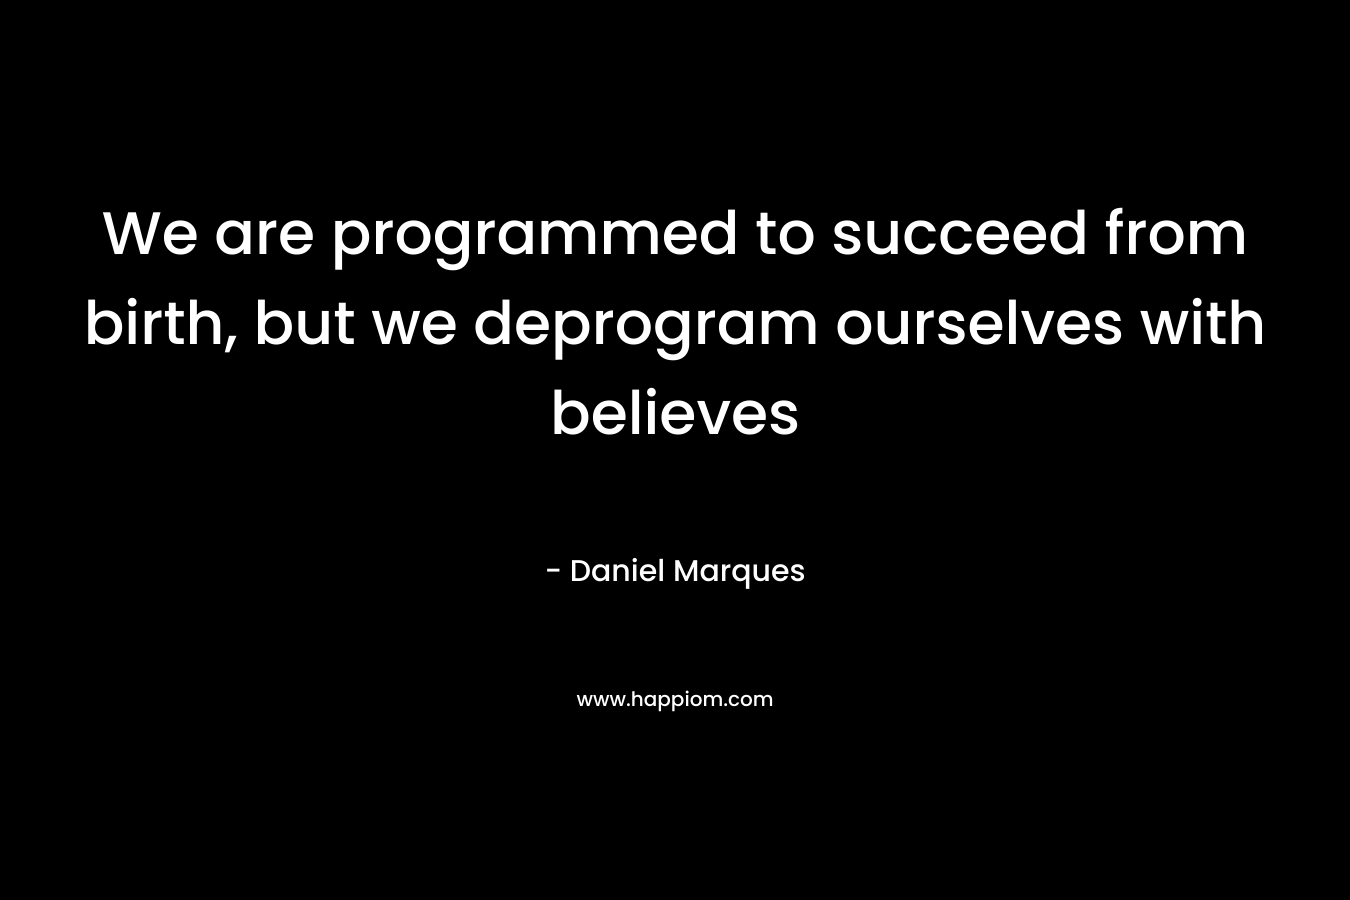 We are programmed to succeed from birth, but we deprogram ourselves with believes – Daniel Marques